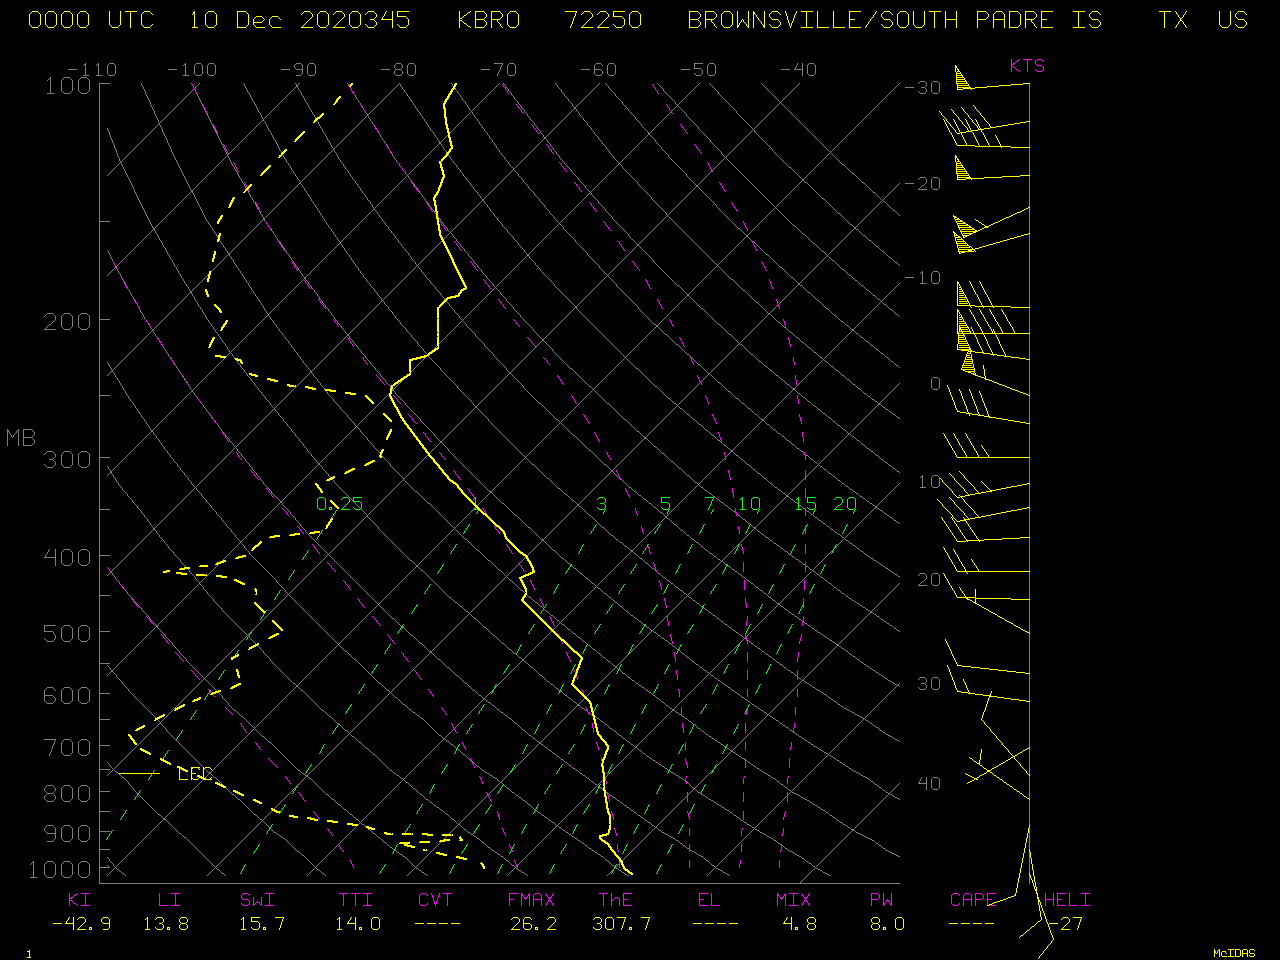 Plot of 00 UTC rawinsonde data from Brownsville, Texas [click to enlarge]